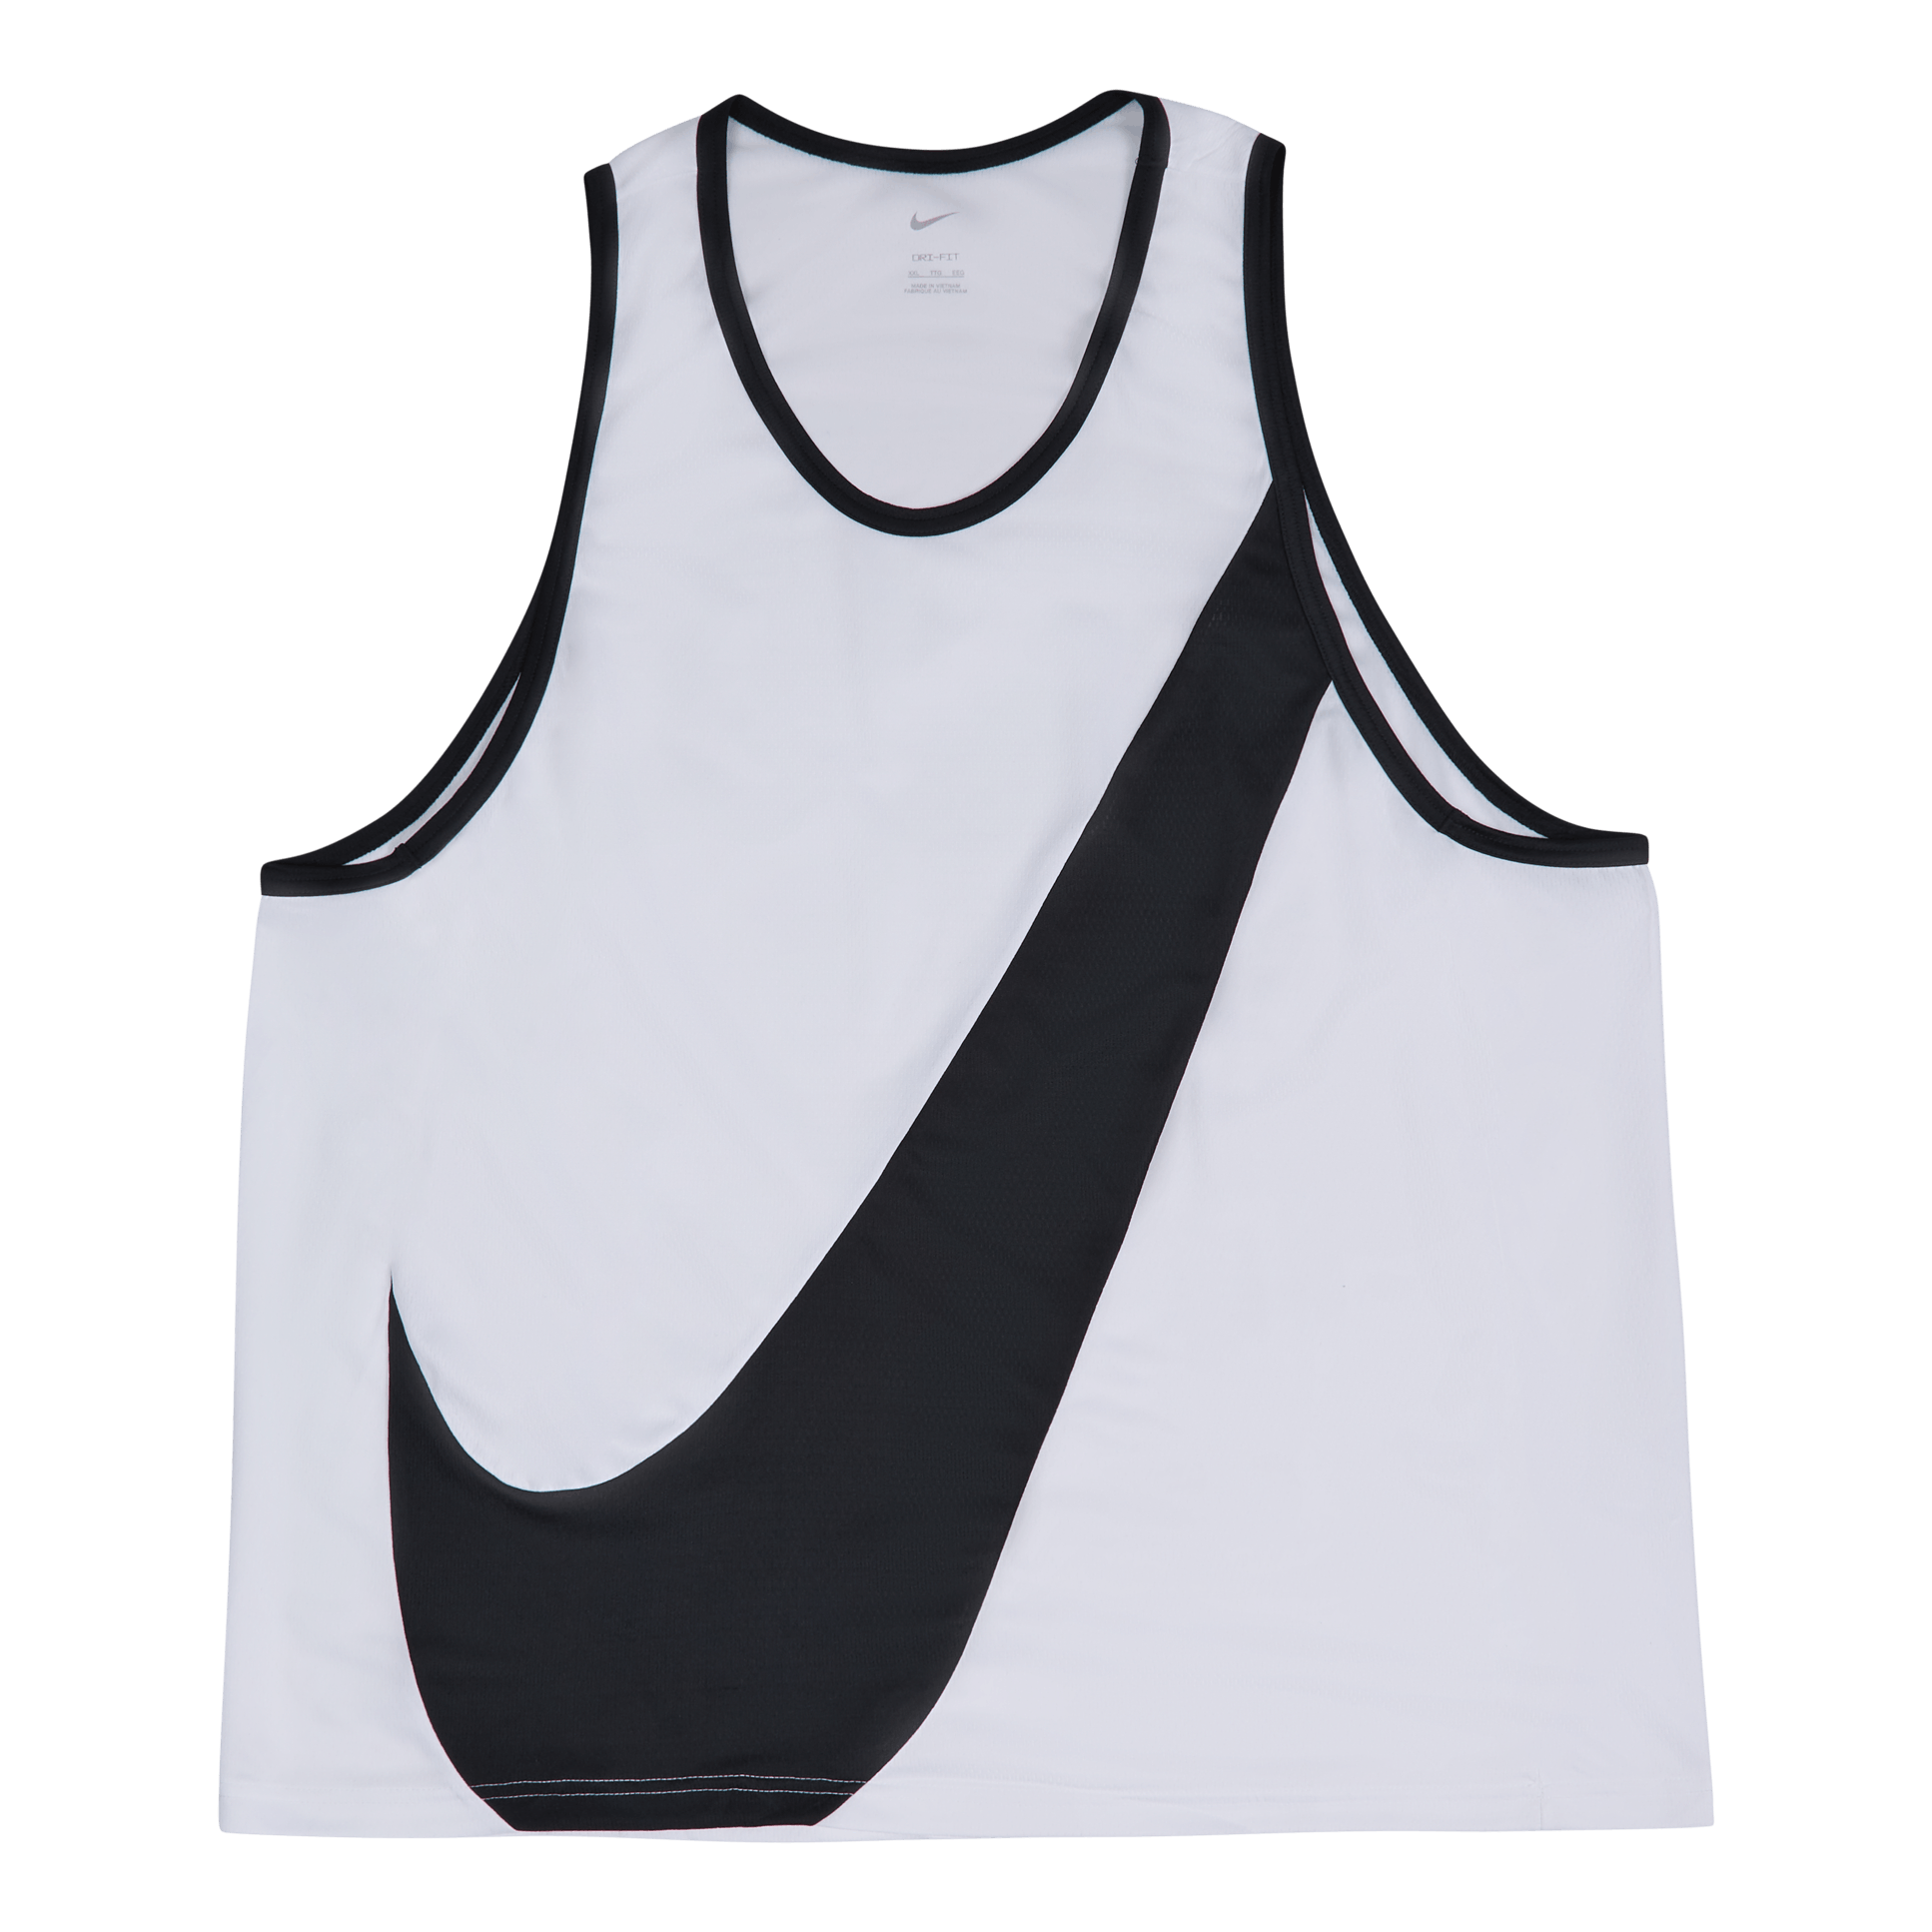 Dri-FIT Men's Basketball Crossover Jersey Basketball is more than a game,  it's a lifestyle. The Nike Dri-FIT Crossover Jersey is light and…